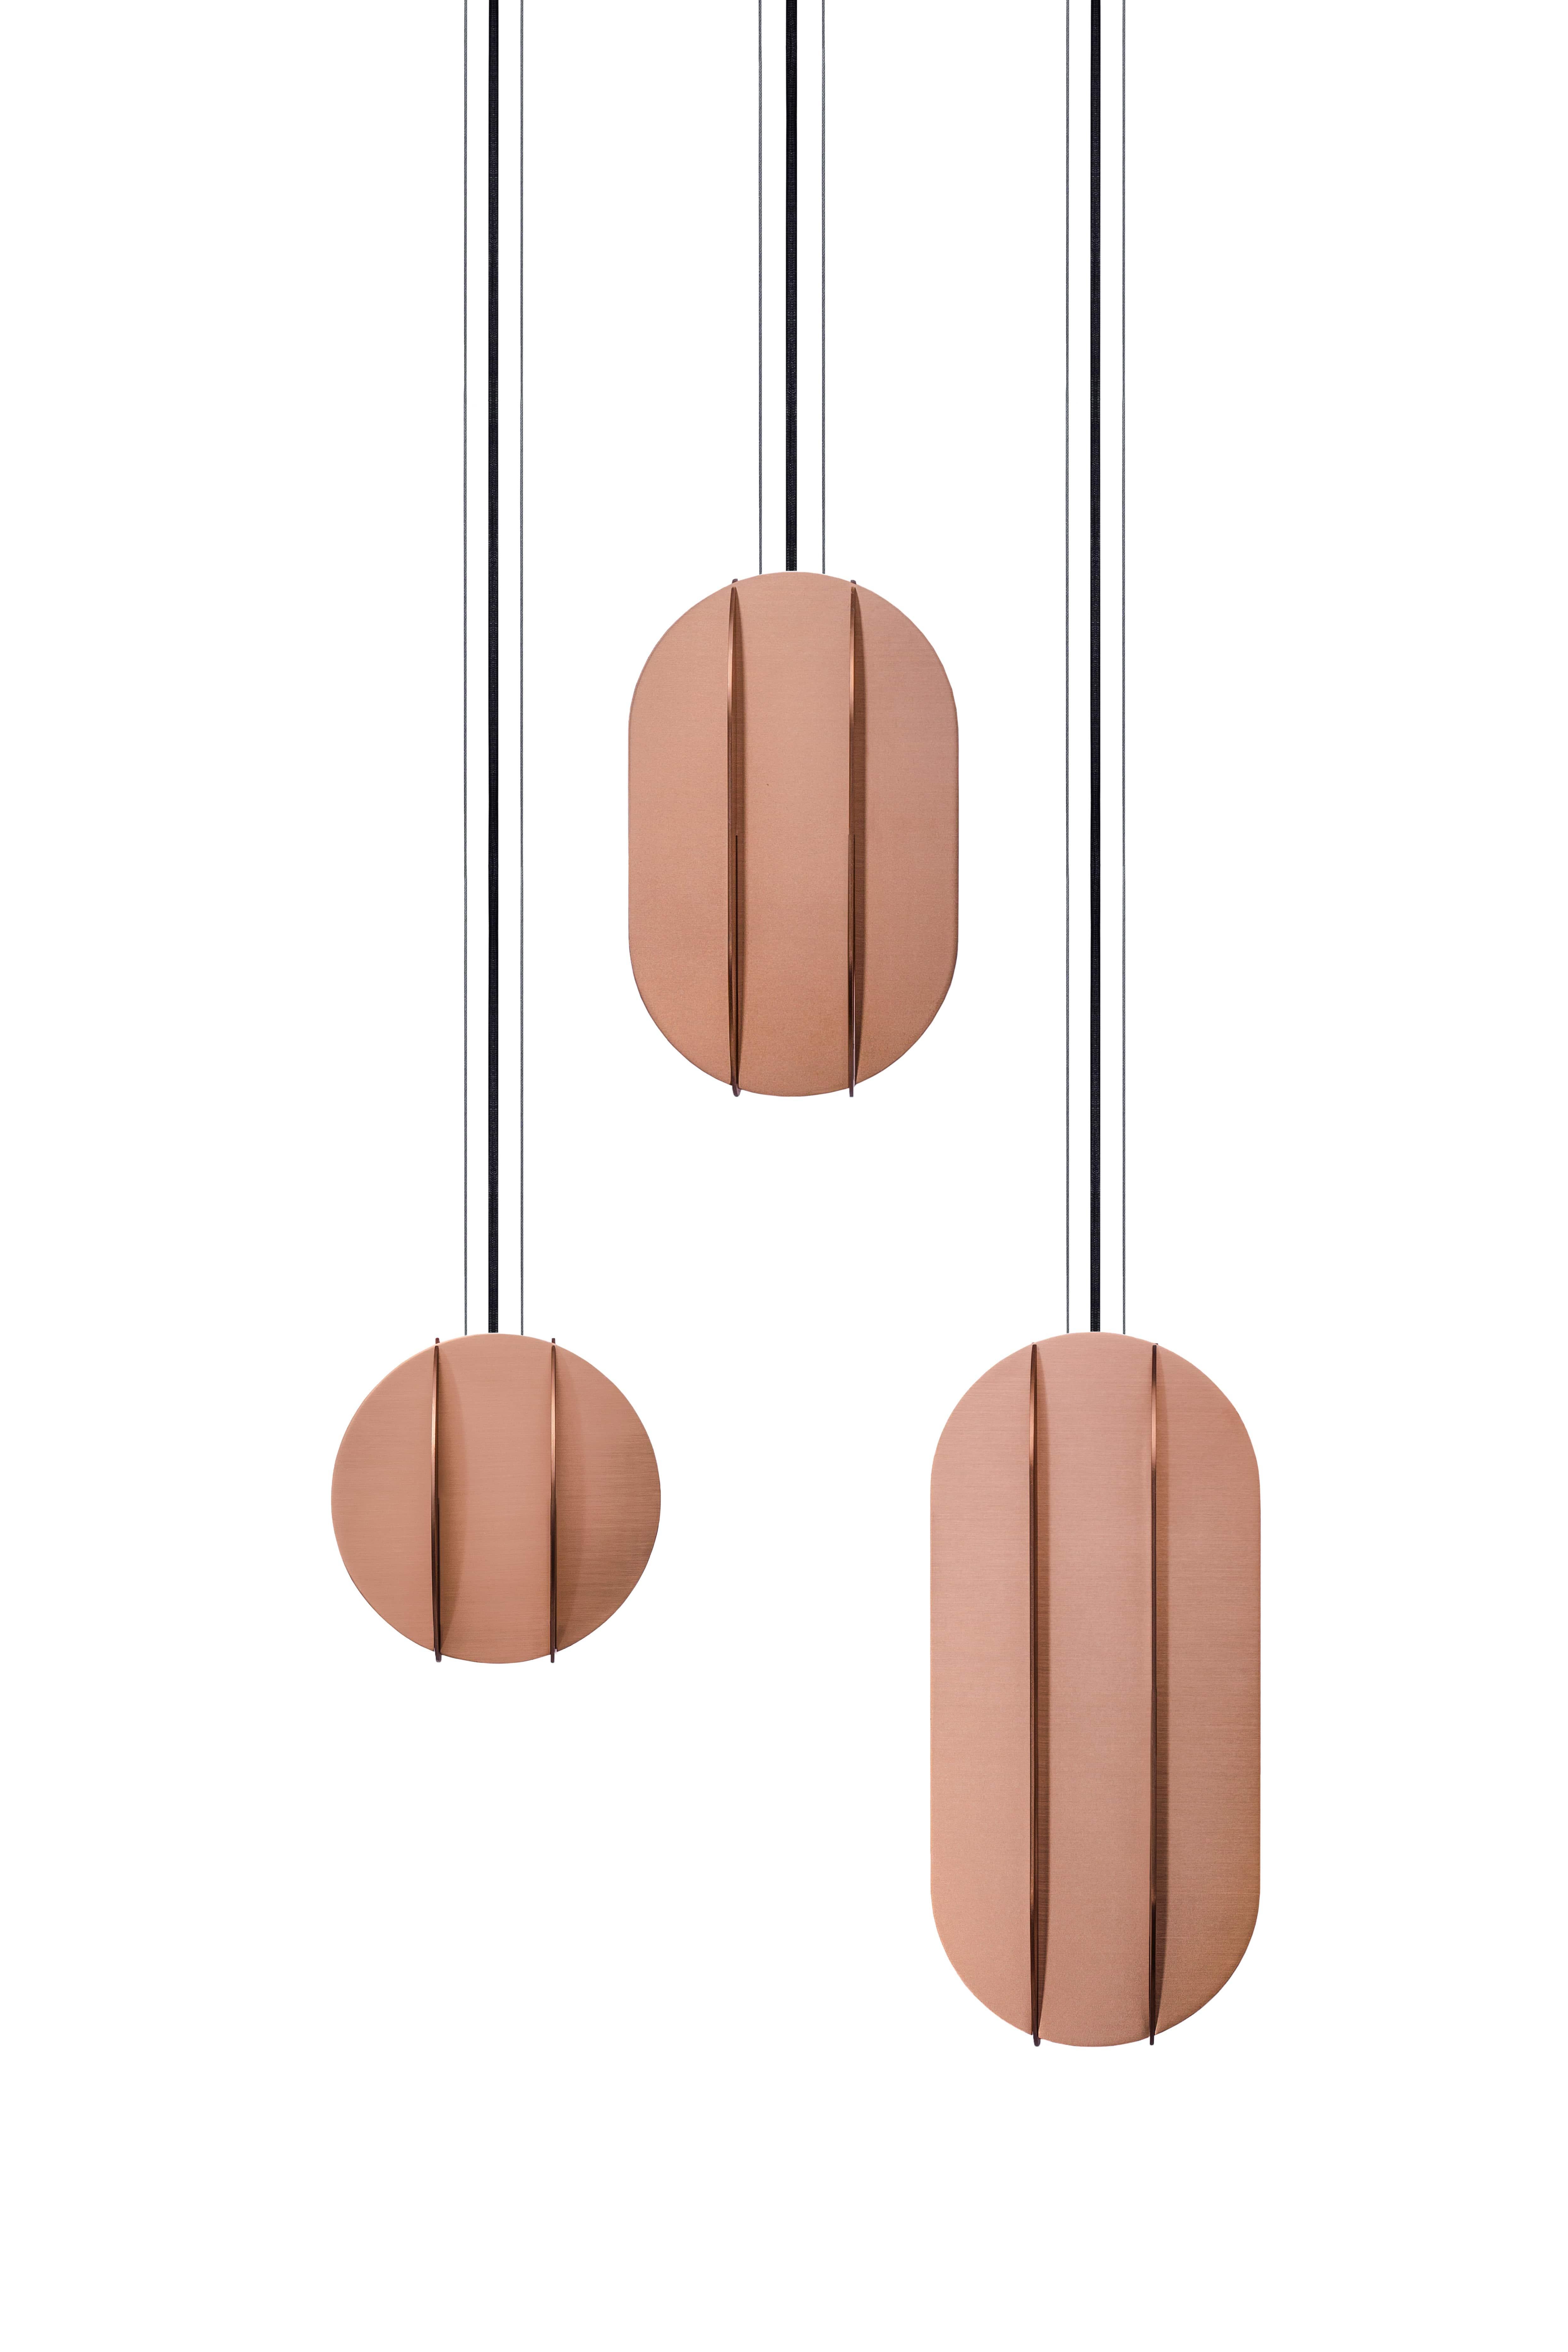 Contemporary Pendant Lamp EL Lamp small CS3 by NOOM in Stainless Steel 7